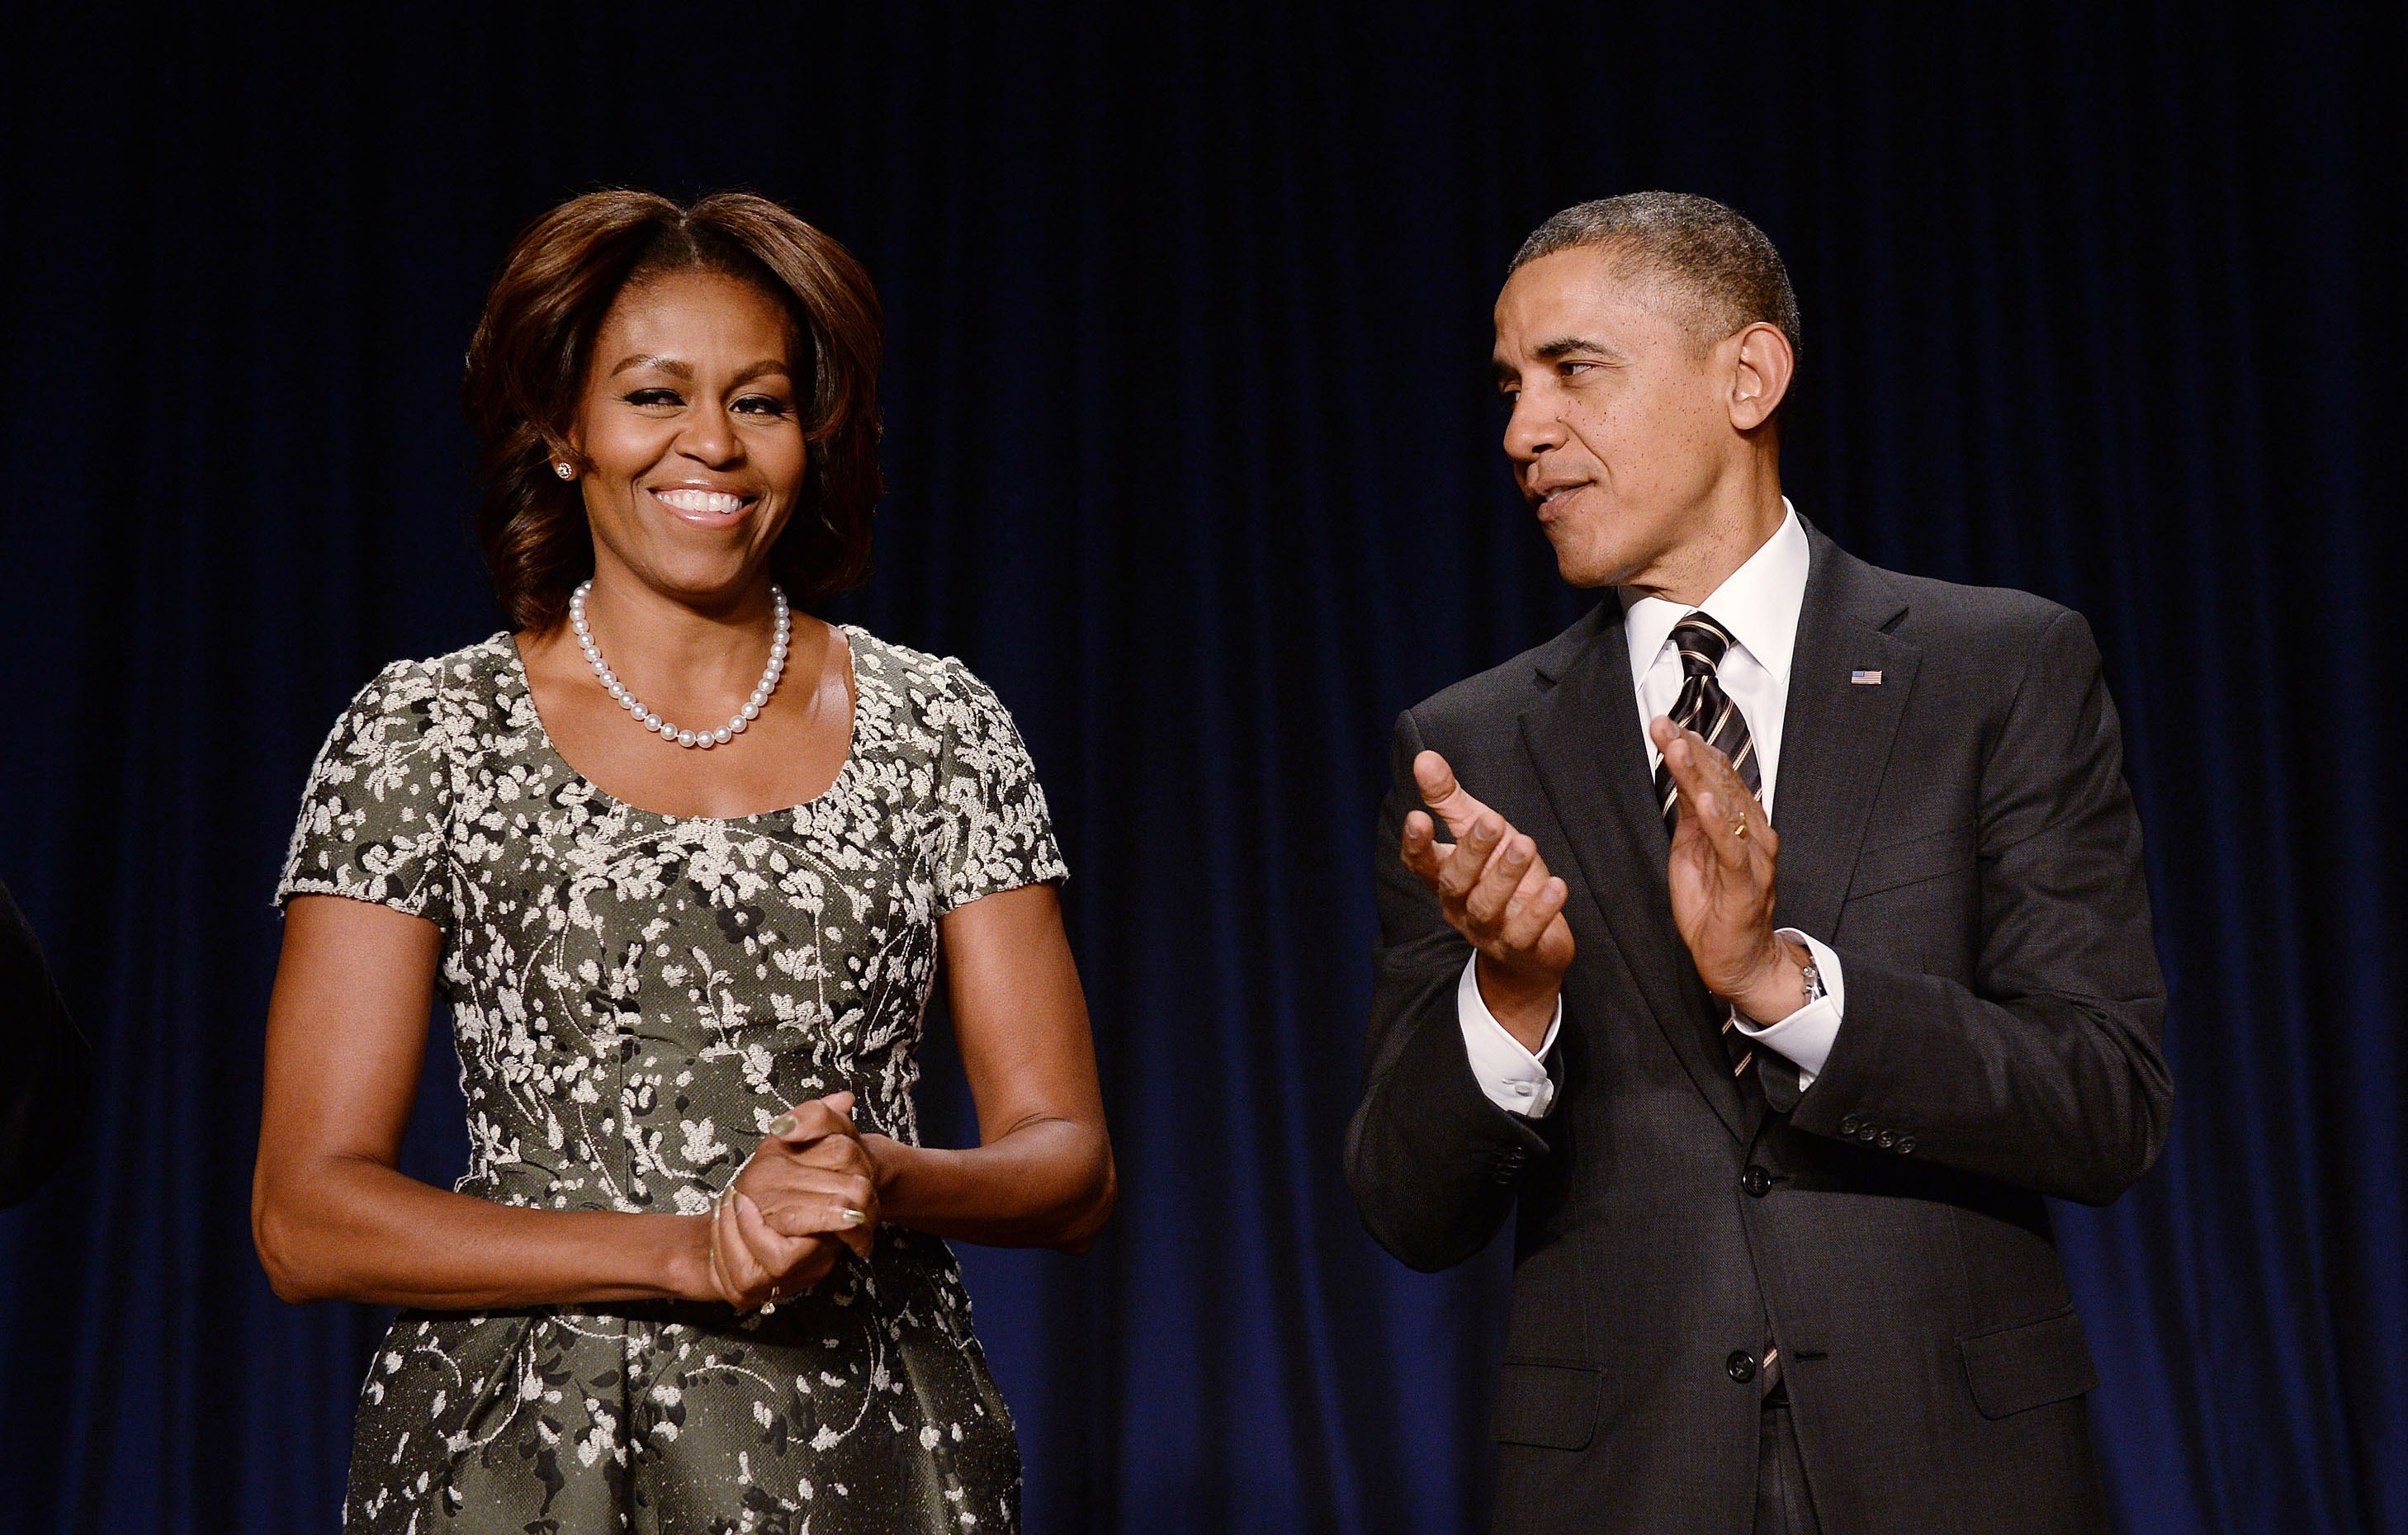 President Barack Obama and first lady Michelle Obama attend the National Prayer Breakfast at the Washington Hilton on Feb. 6, 2014 in Washington. (Olivier Douliery—Getty Images)